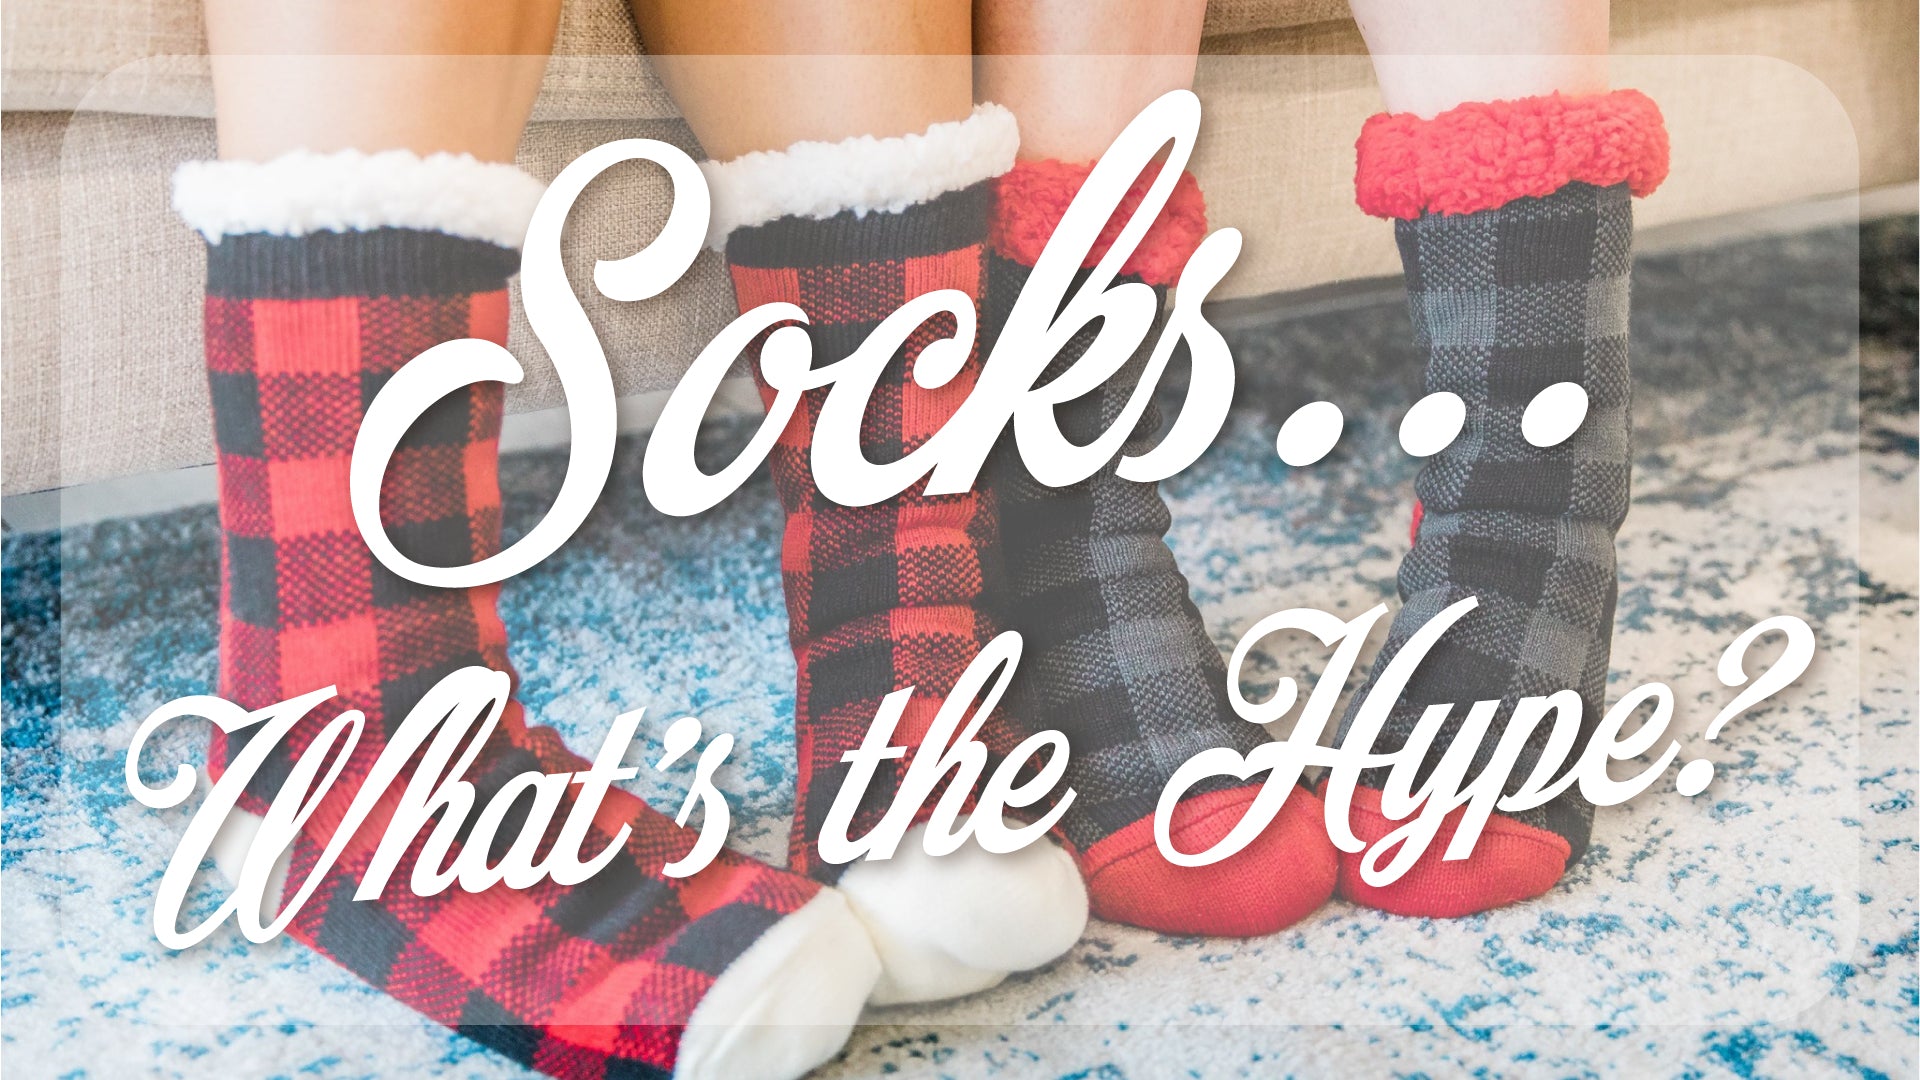 Socks: What's the Hype?